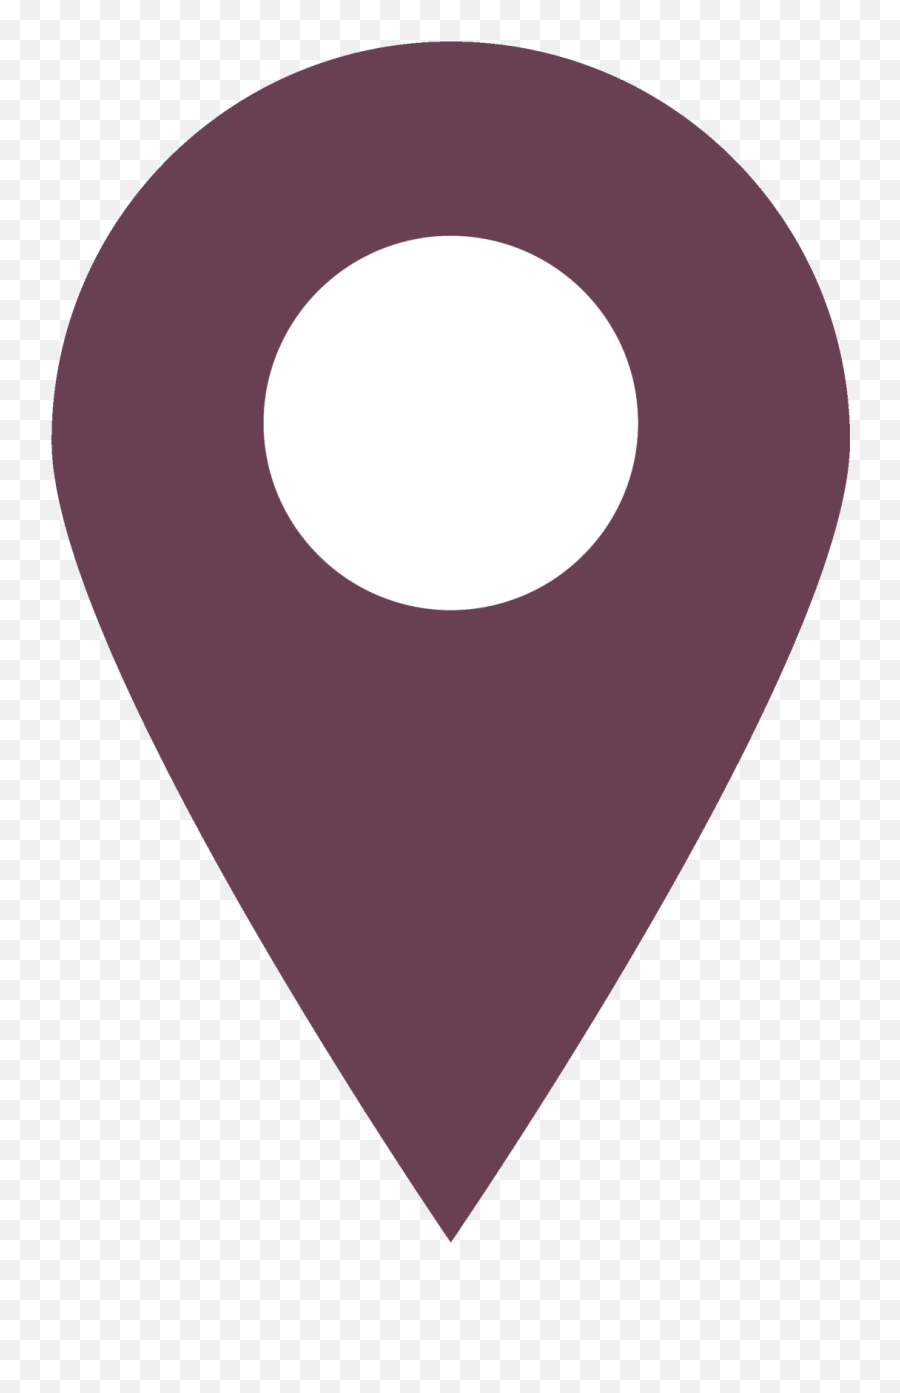 Location Icon Gvpennysavercom - University Of The Arts Png,Facebook Watch Icon